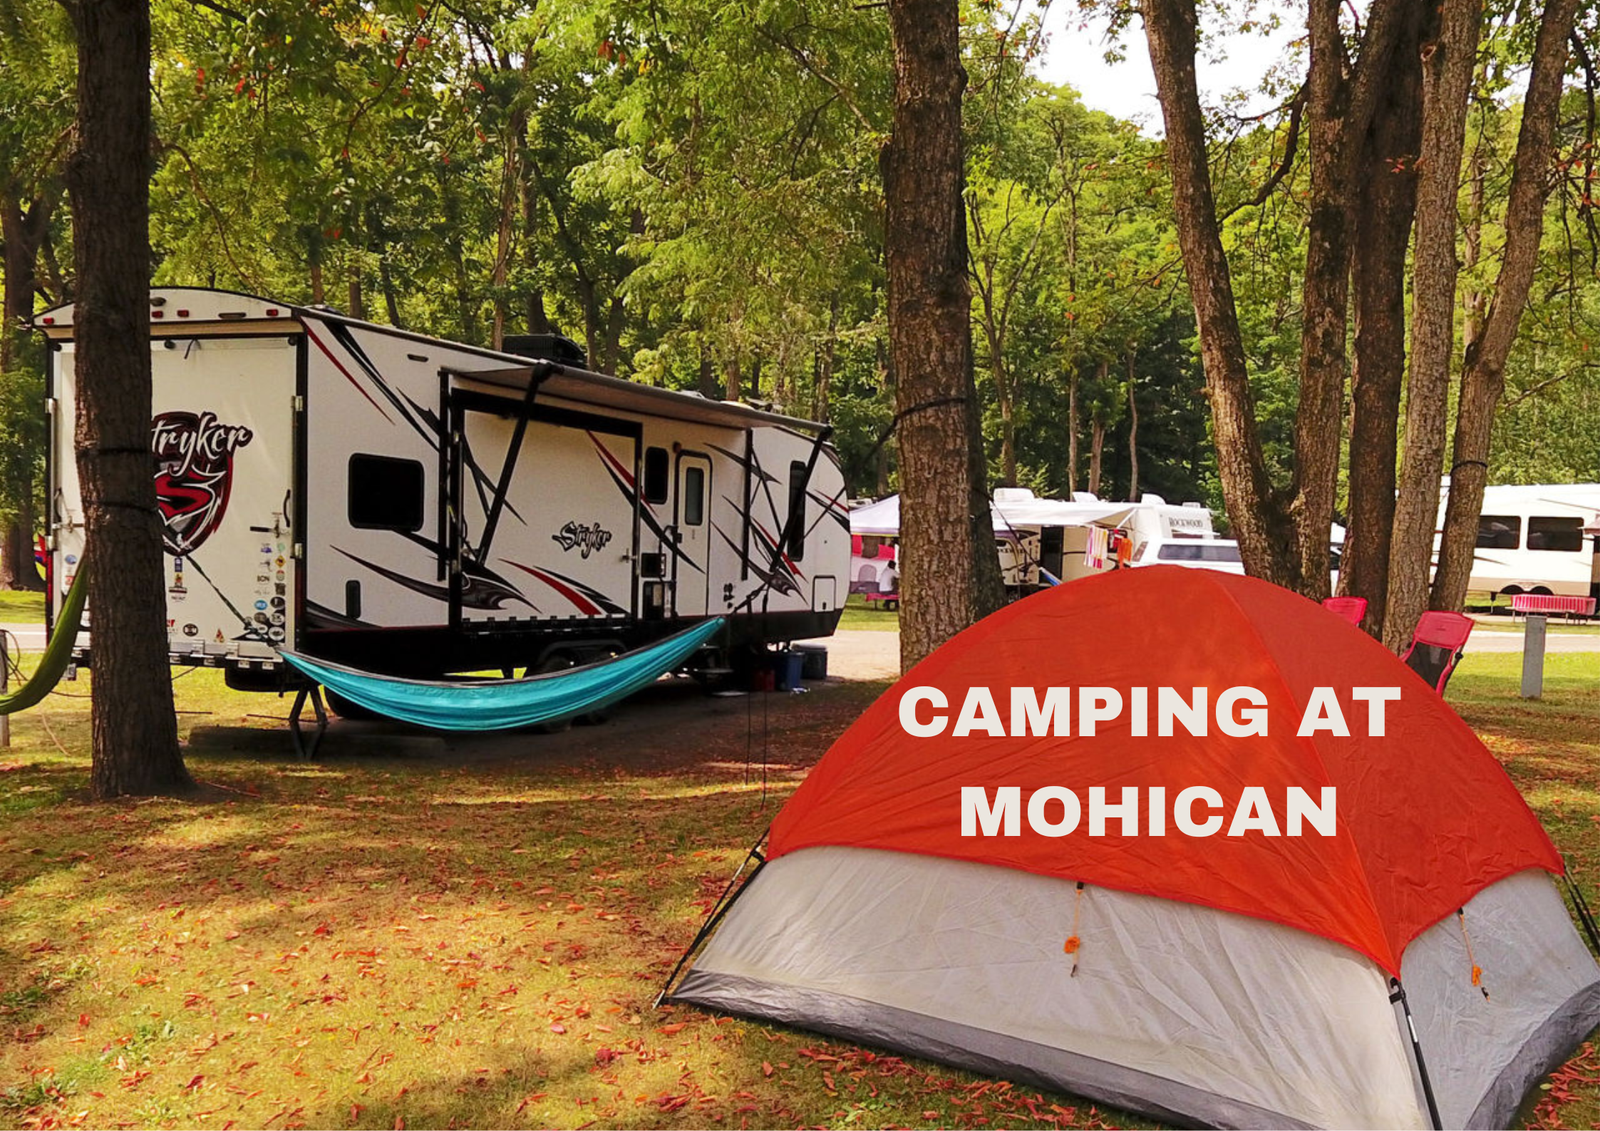 Camping at Mohican